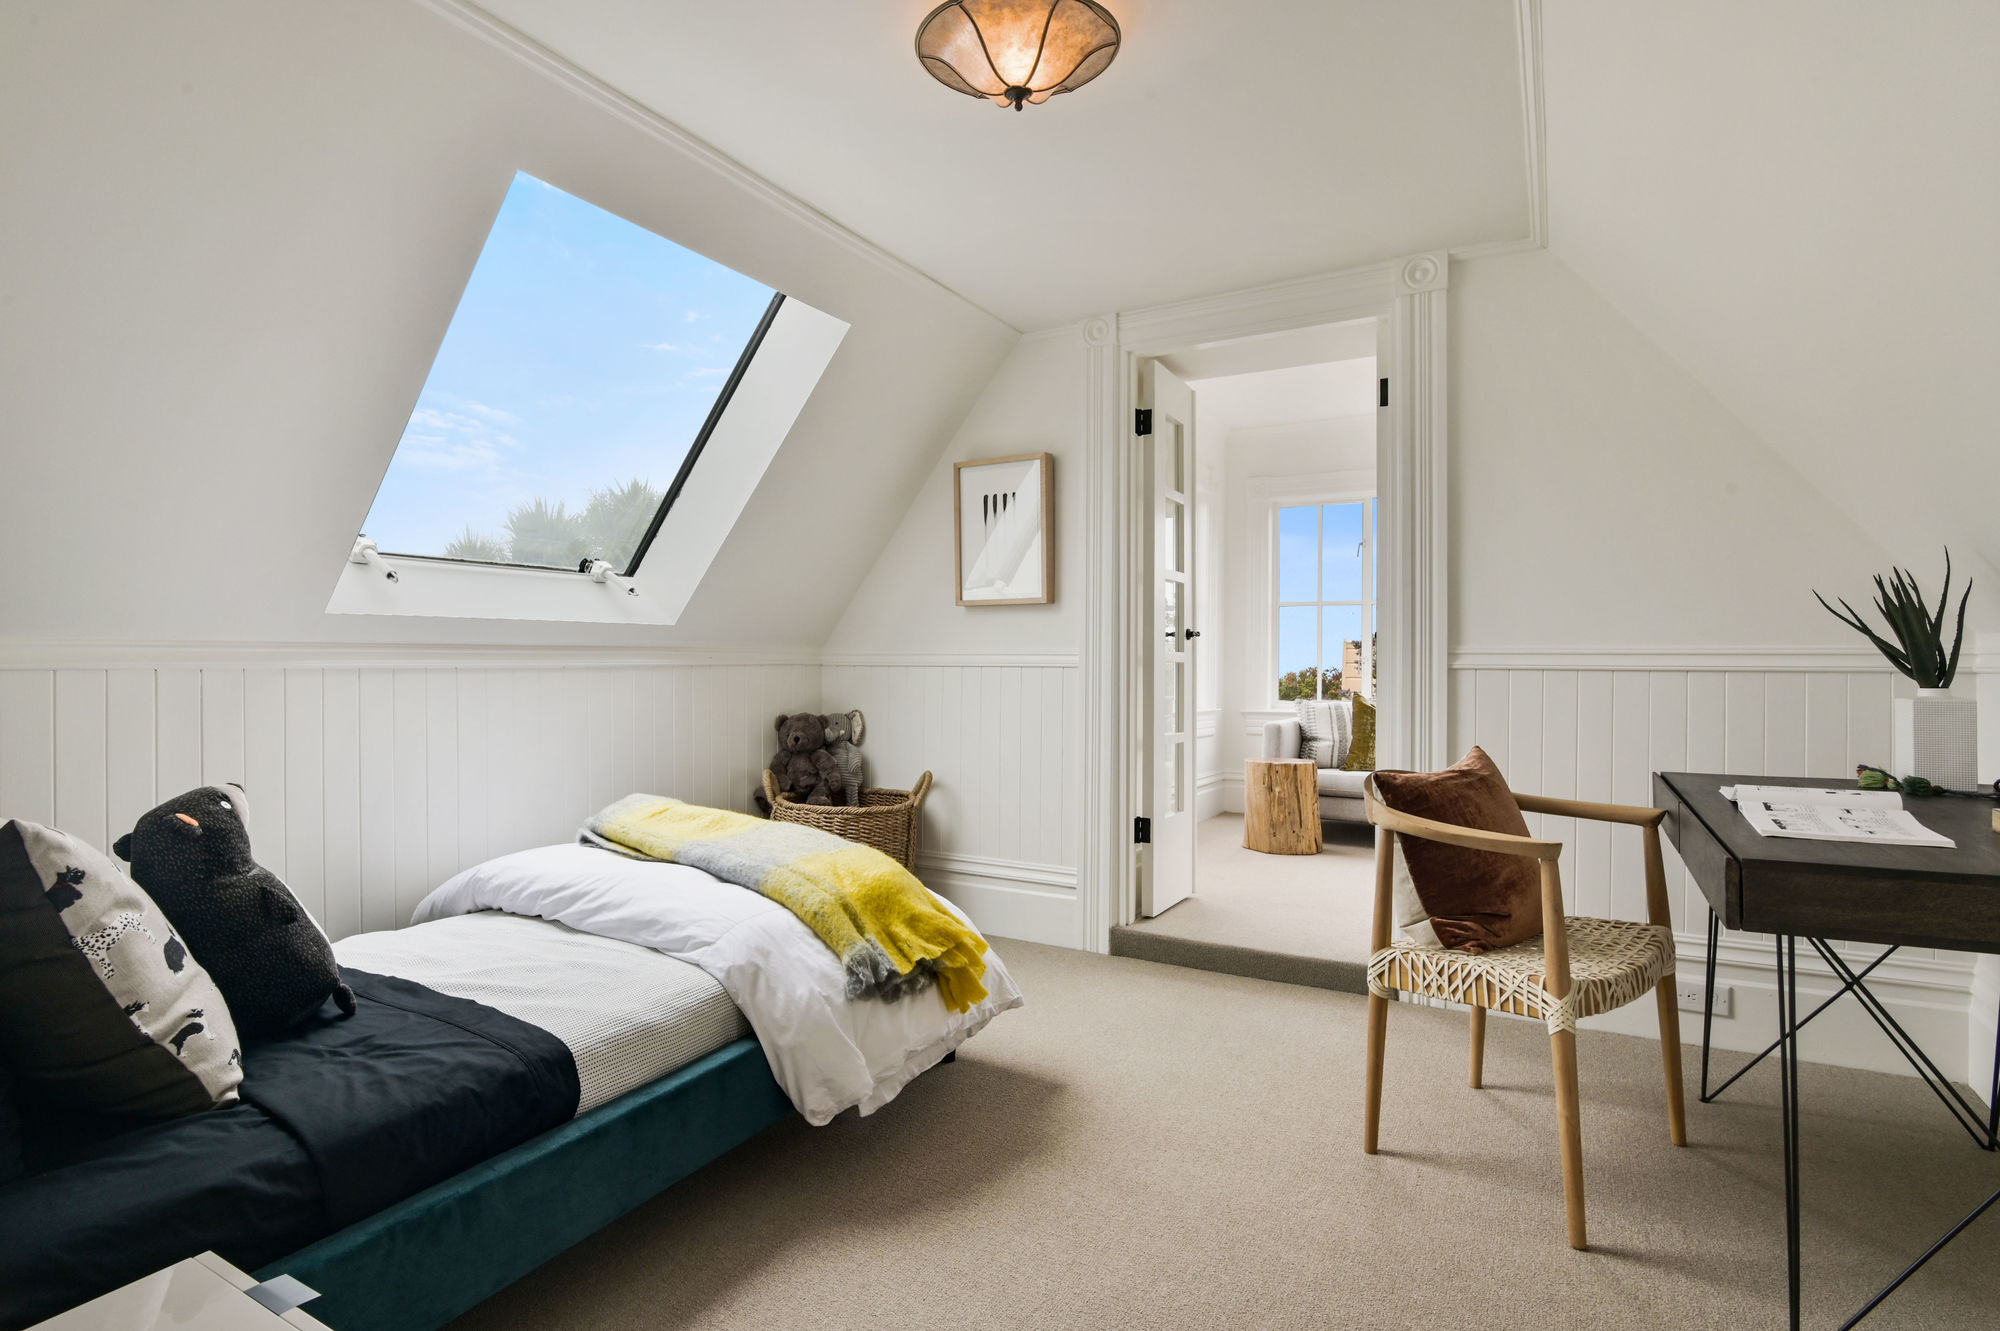 Property Photo: Bedroom with slanted ceiling and a skylight over the bed